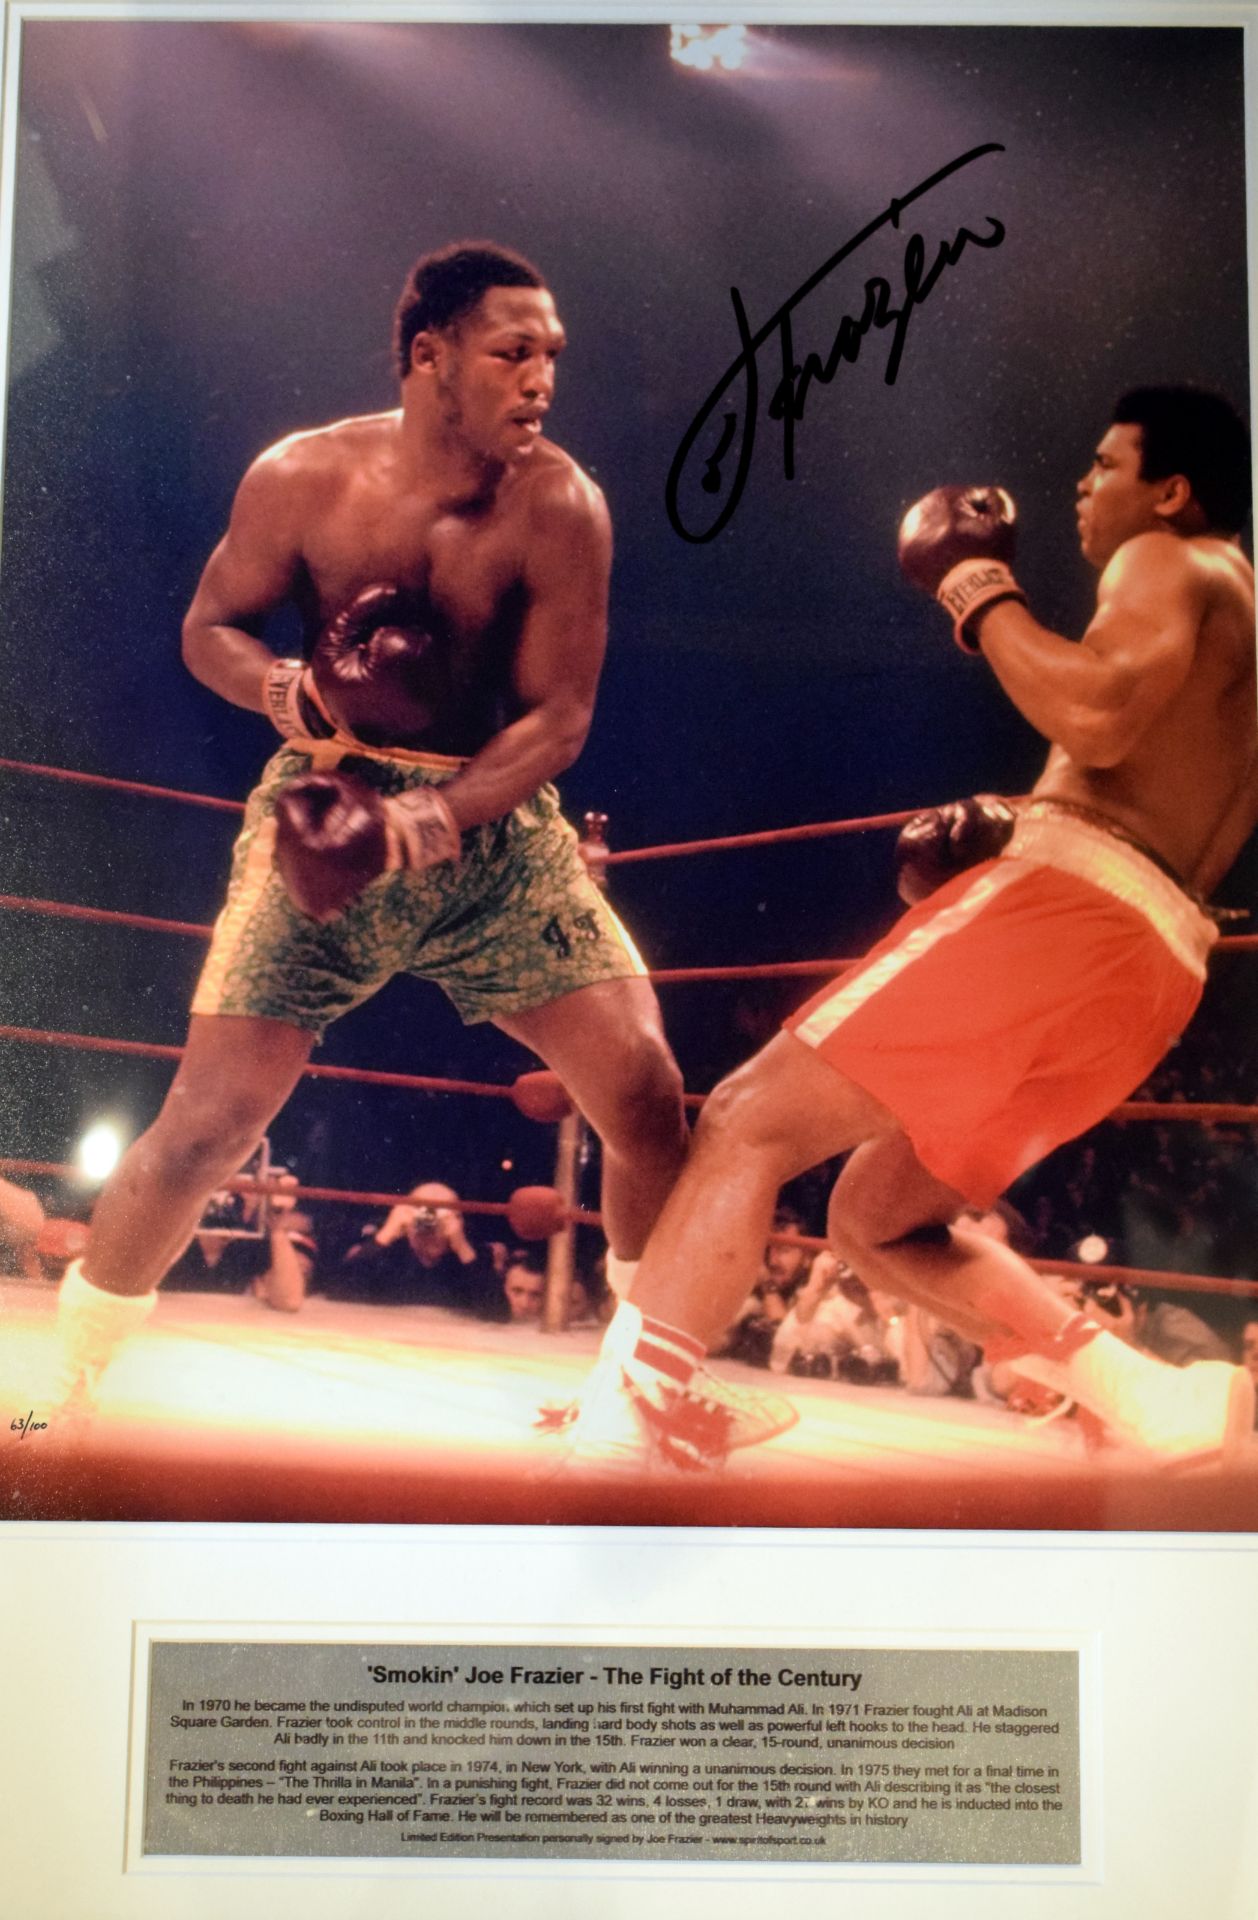 Excellent Signed Photograph of Joe Frazier knocking down Ali in 'The Fight Of The Century' - Image 3 of 5